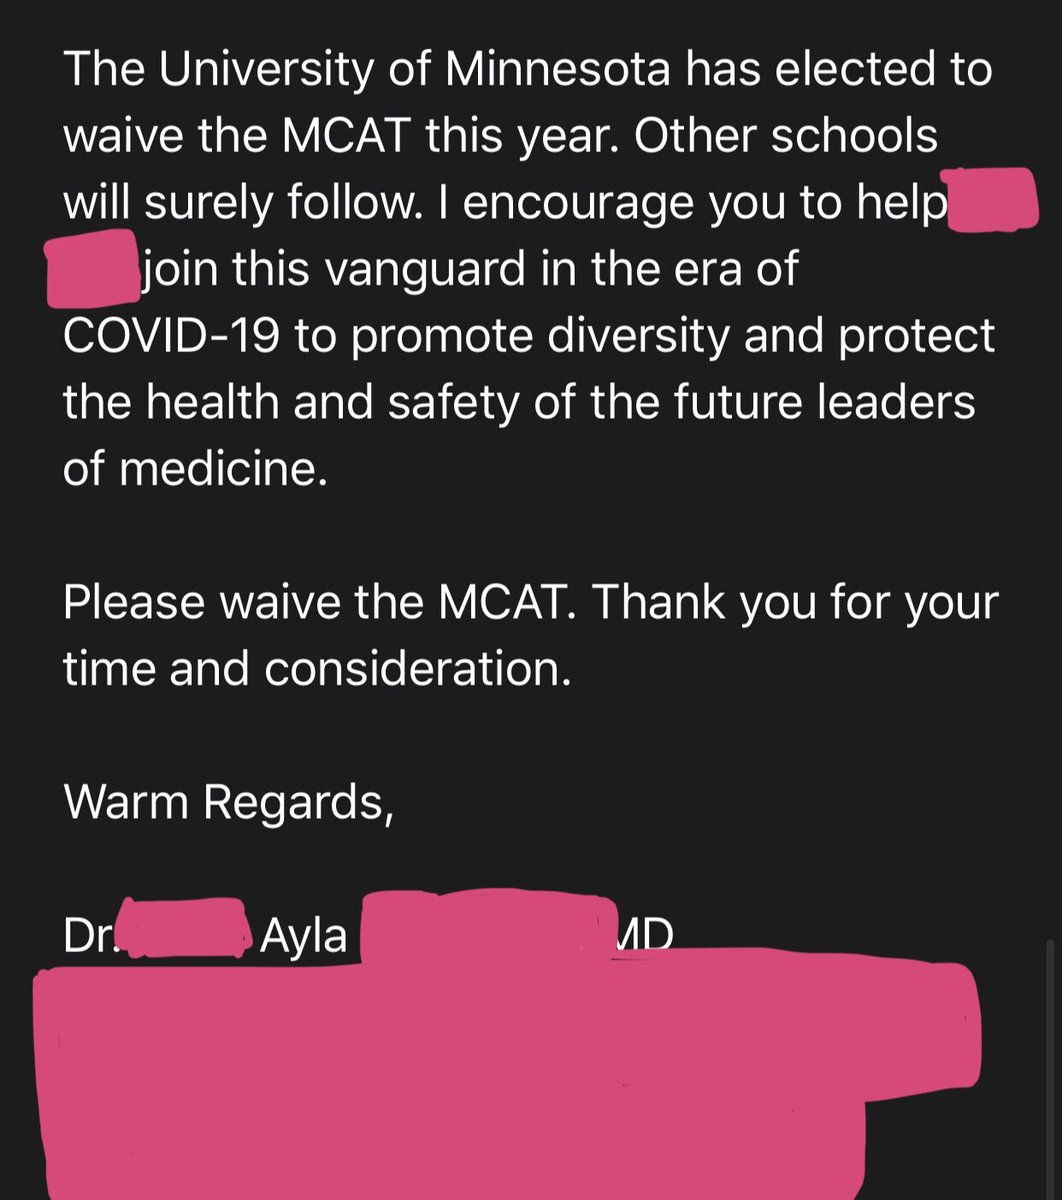 I emailed the Dean of Admissions of my med school to encourage the board to #WaiveTheMCAT. 

It took 5 minutes. 

See my (admittedly imperfect) email below. I‘ll call him to follow up next week if I haven’t received a response.

#MedTwitter, please do the same.